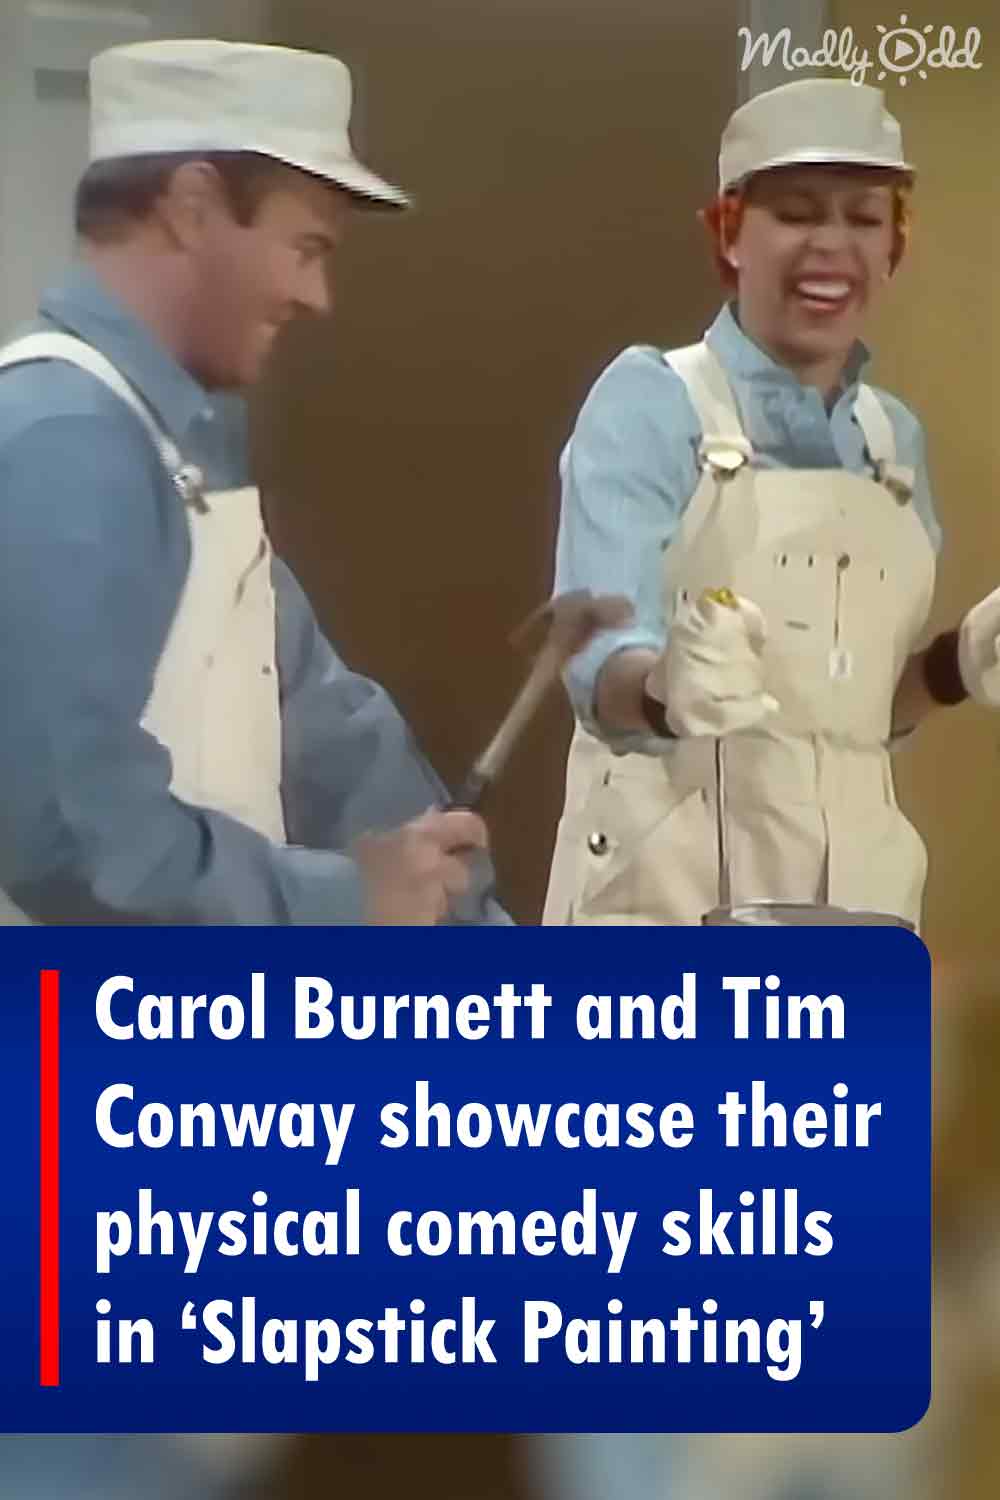 Carol Burnett and Tim Conway showcase their physical comedy skills in ‘Slapstick Painting’